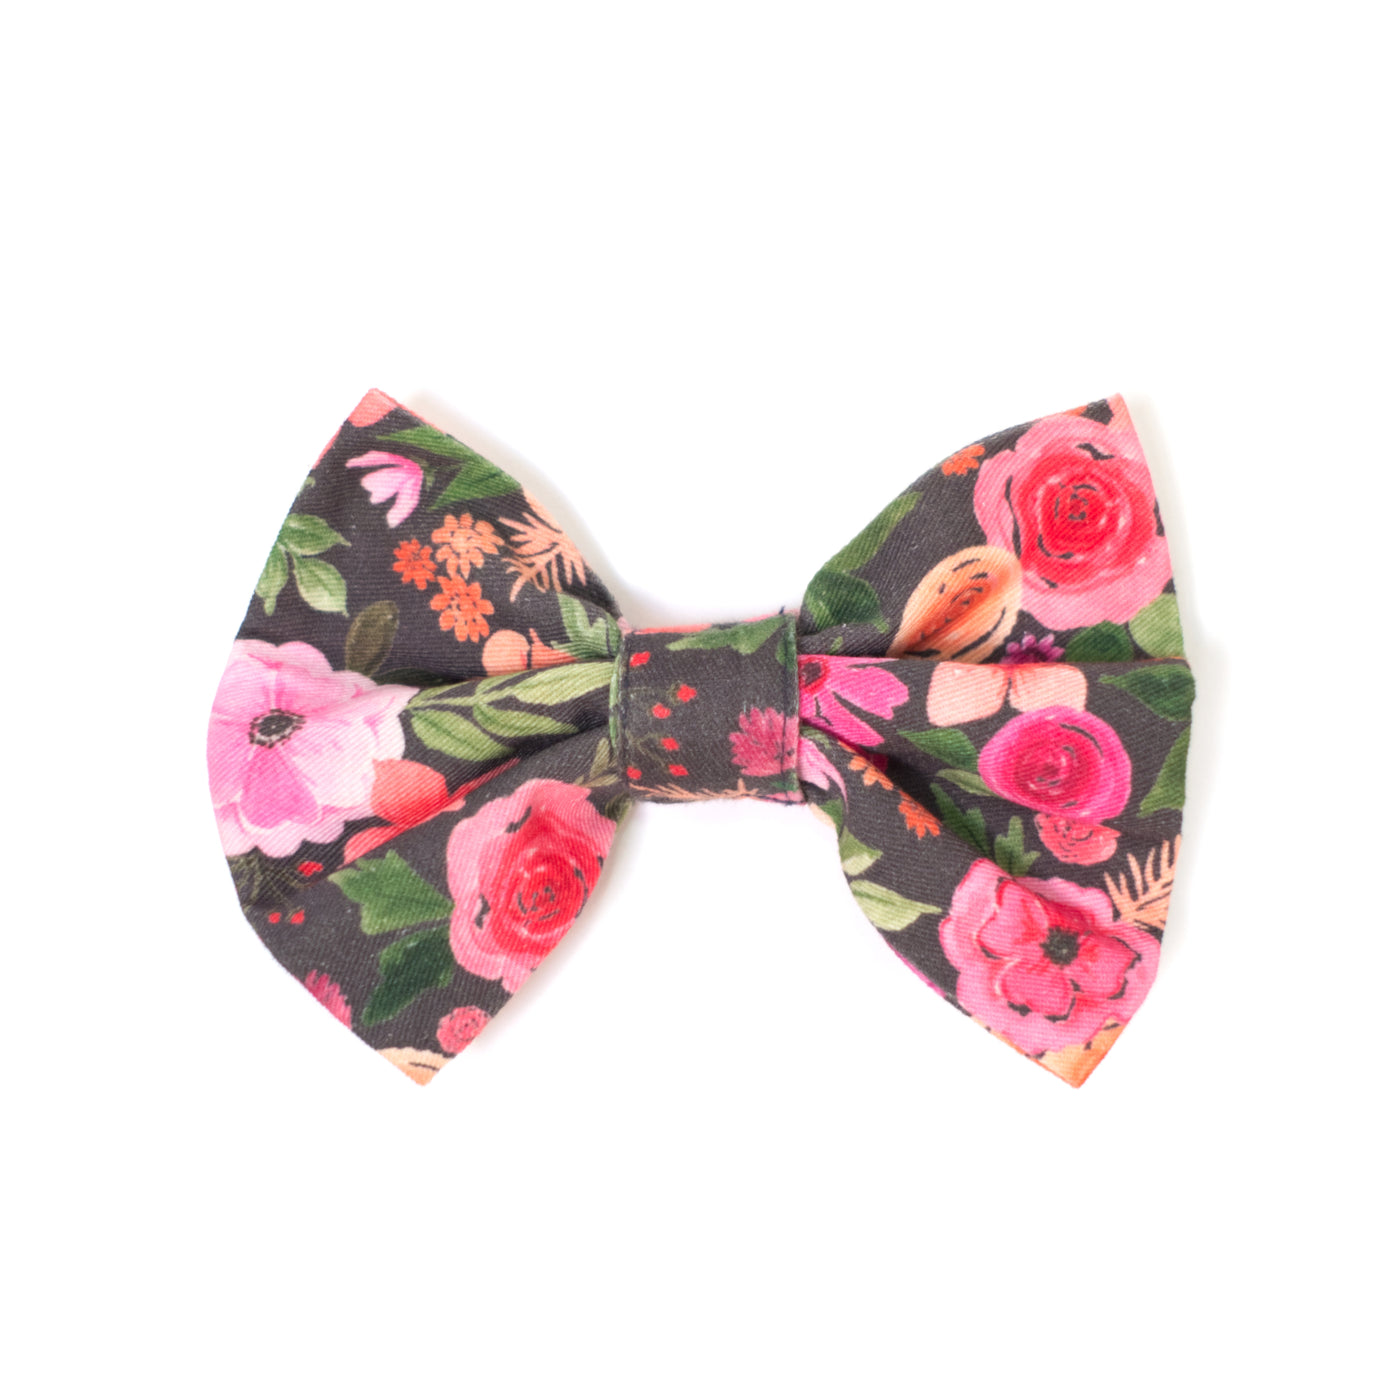 Pink and orange floral classic dog bow tie